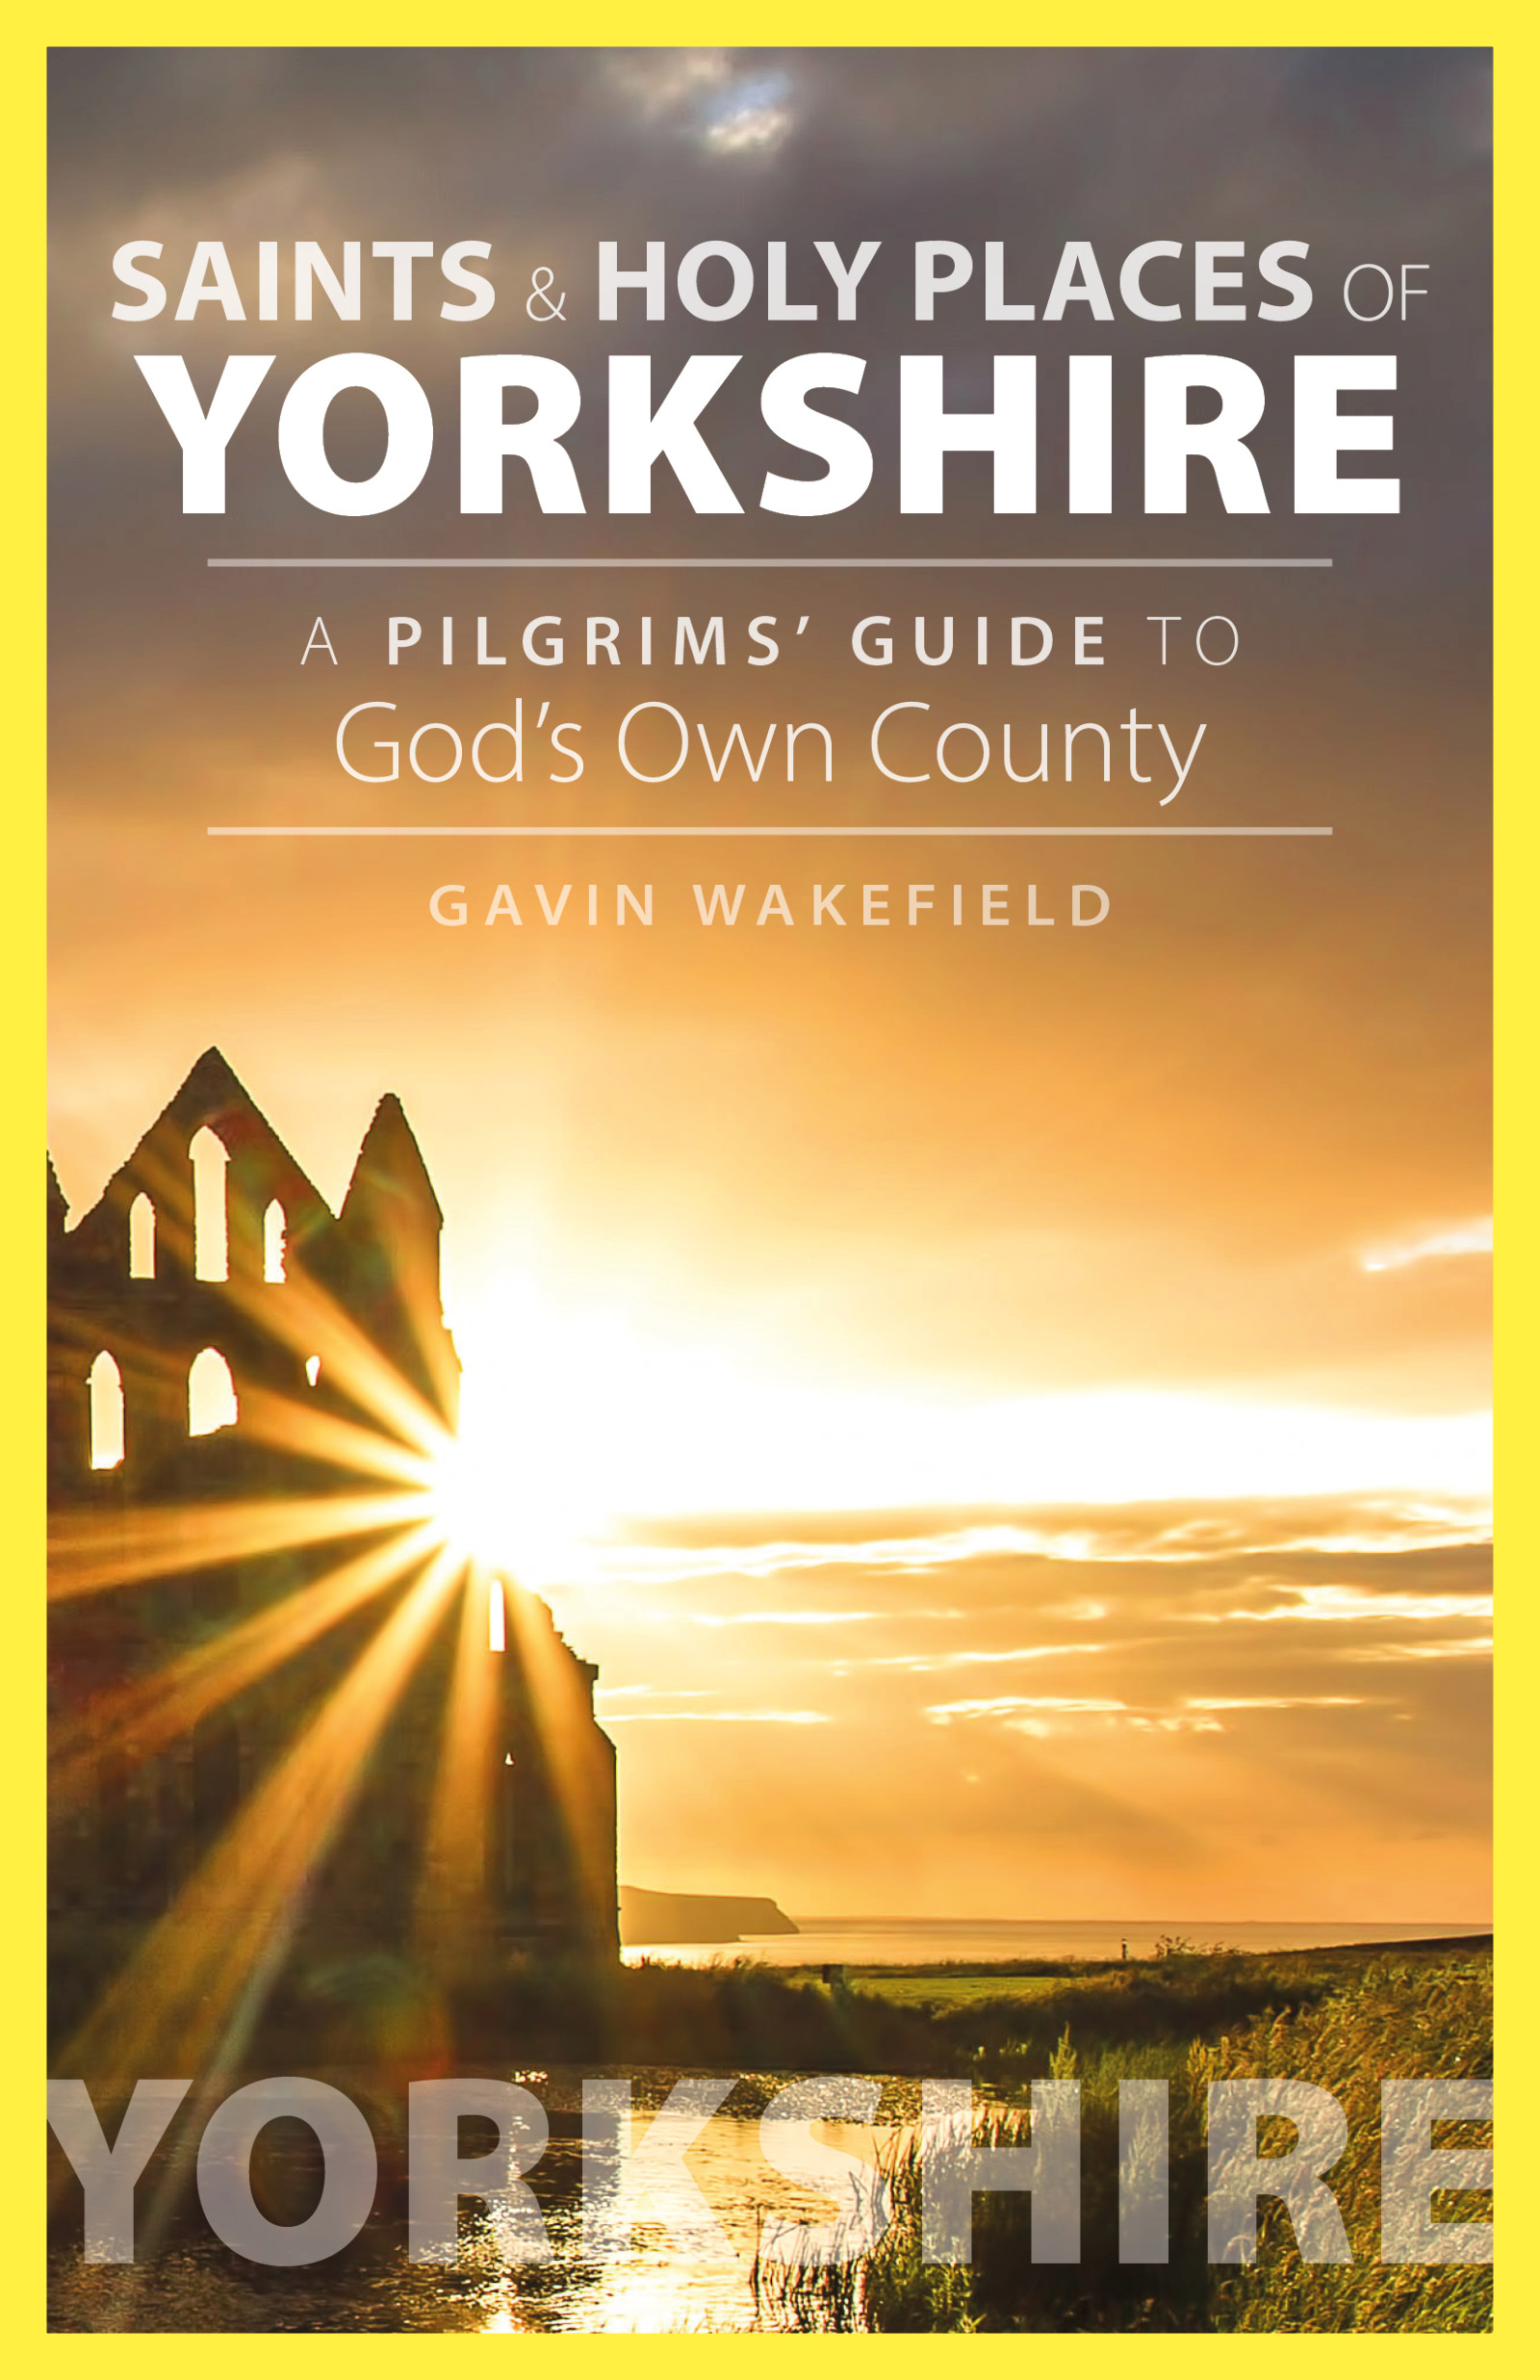 Saints and Holy Places of Yorkshire is a unique guidebook for visitors to the many pilgrimage sites in Yorkshire and the holy people who have been associated with them